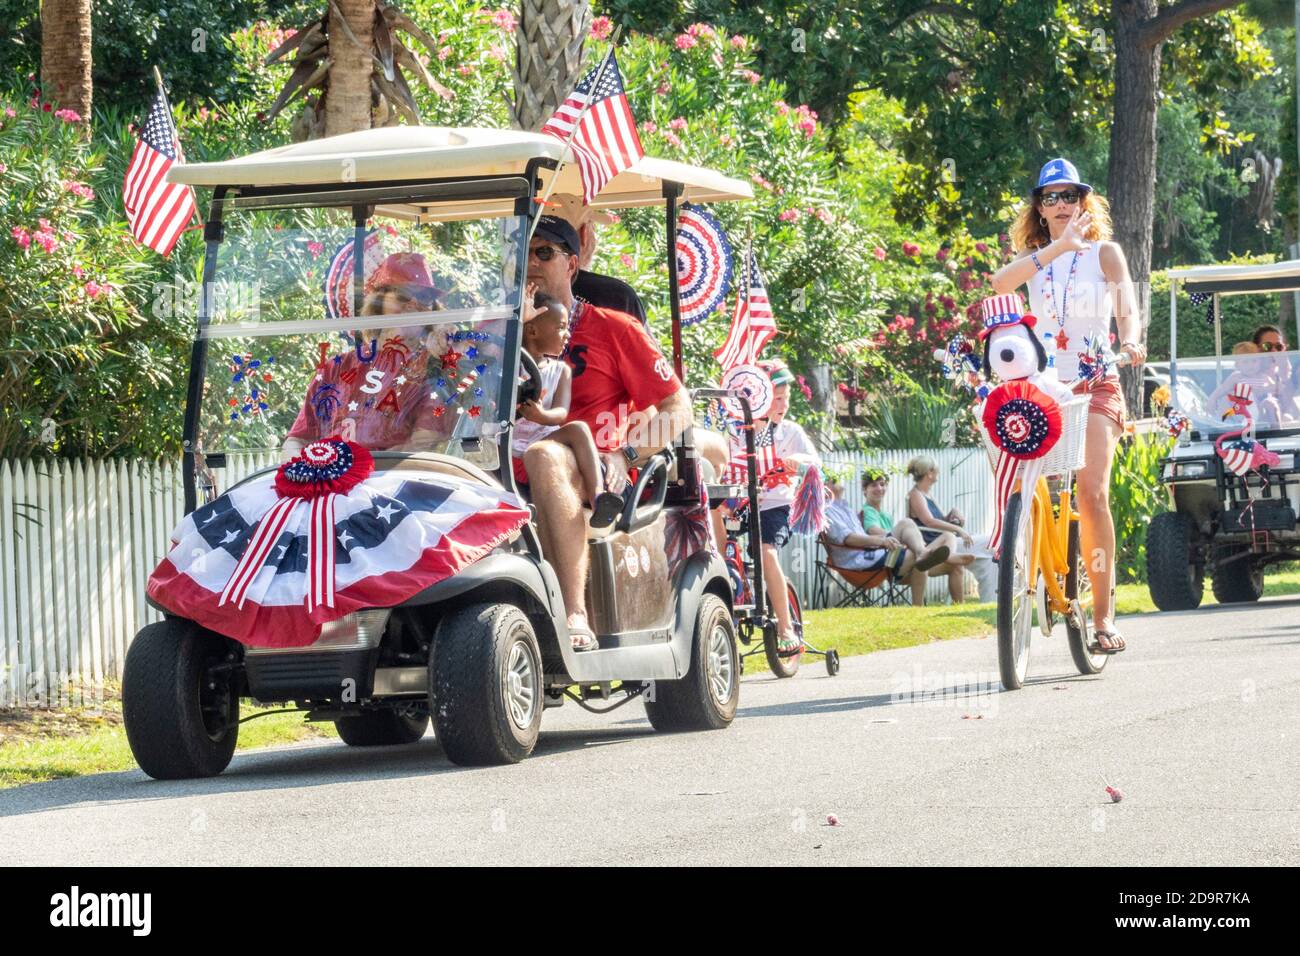 Decorated golf cart floats and bicycles ride down the road during the annual Independence Day parade July 4, 2019 in Sullivan's Island, South Carolina. The tiny affluent Sea Island beach community across from Charleston holds an outsized golf cart parade featuring more than 75 decorated carts. Stock Photo